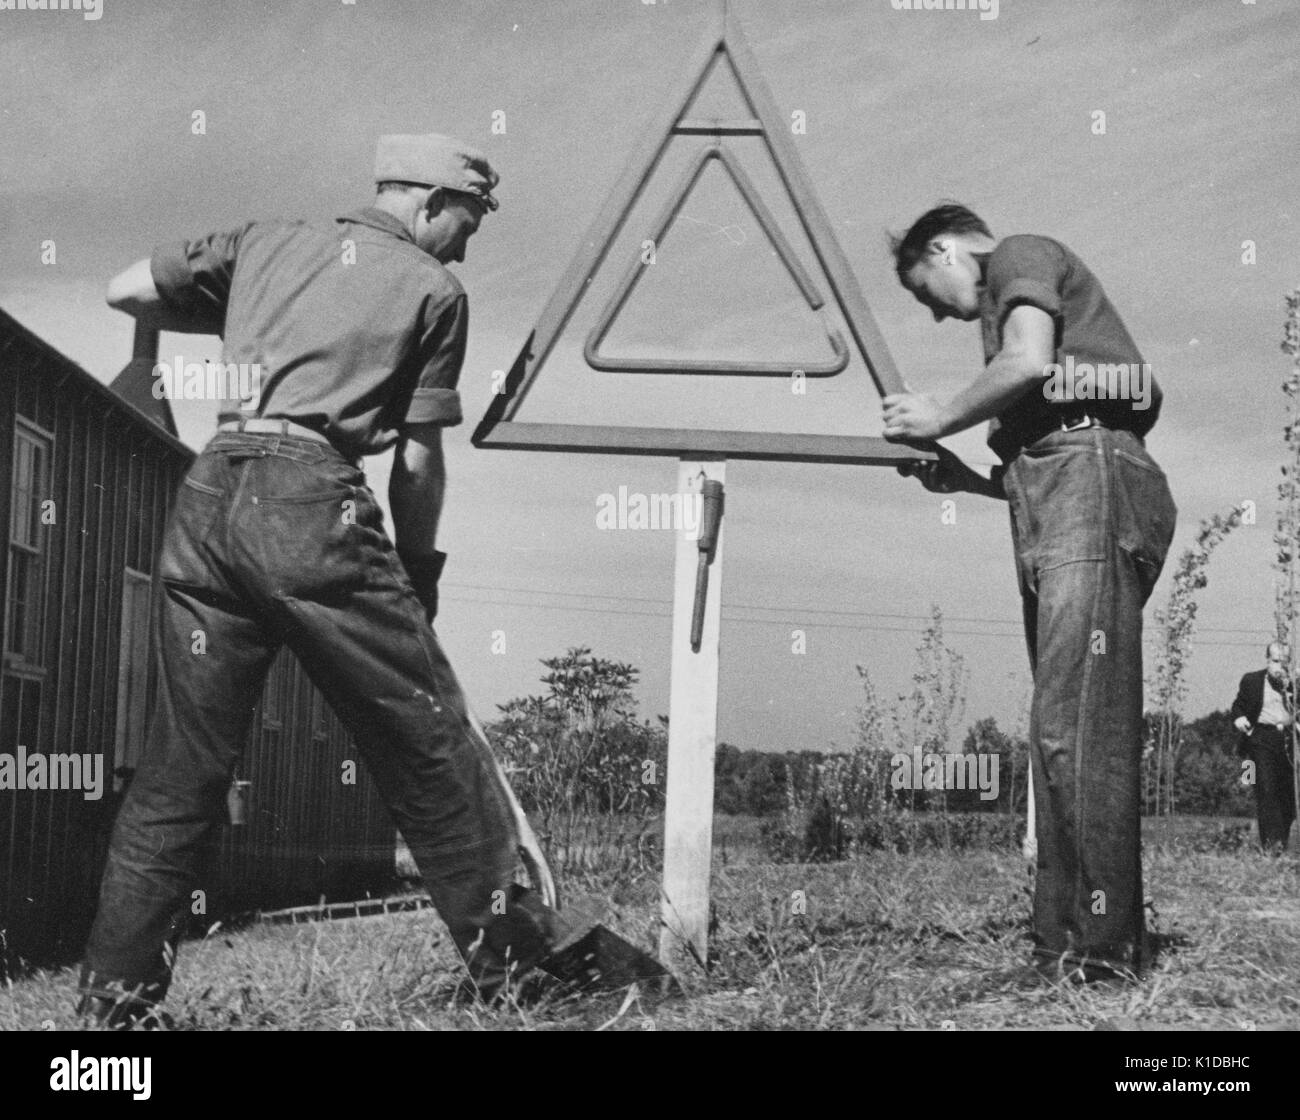 Two male Civilian Conservation Corps (CCC) workers in uniform erecting a sign in a field, one worker using a shovel, the other holding the sign to steady it, Beltsville, Maryland, 1935. From the New York Public Library. Stock Photo